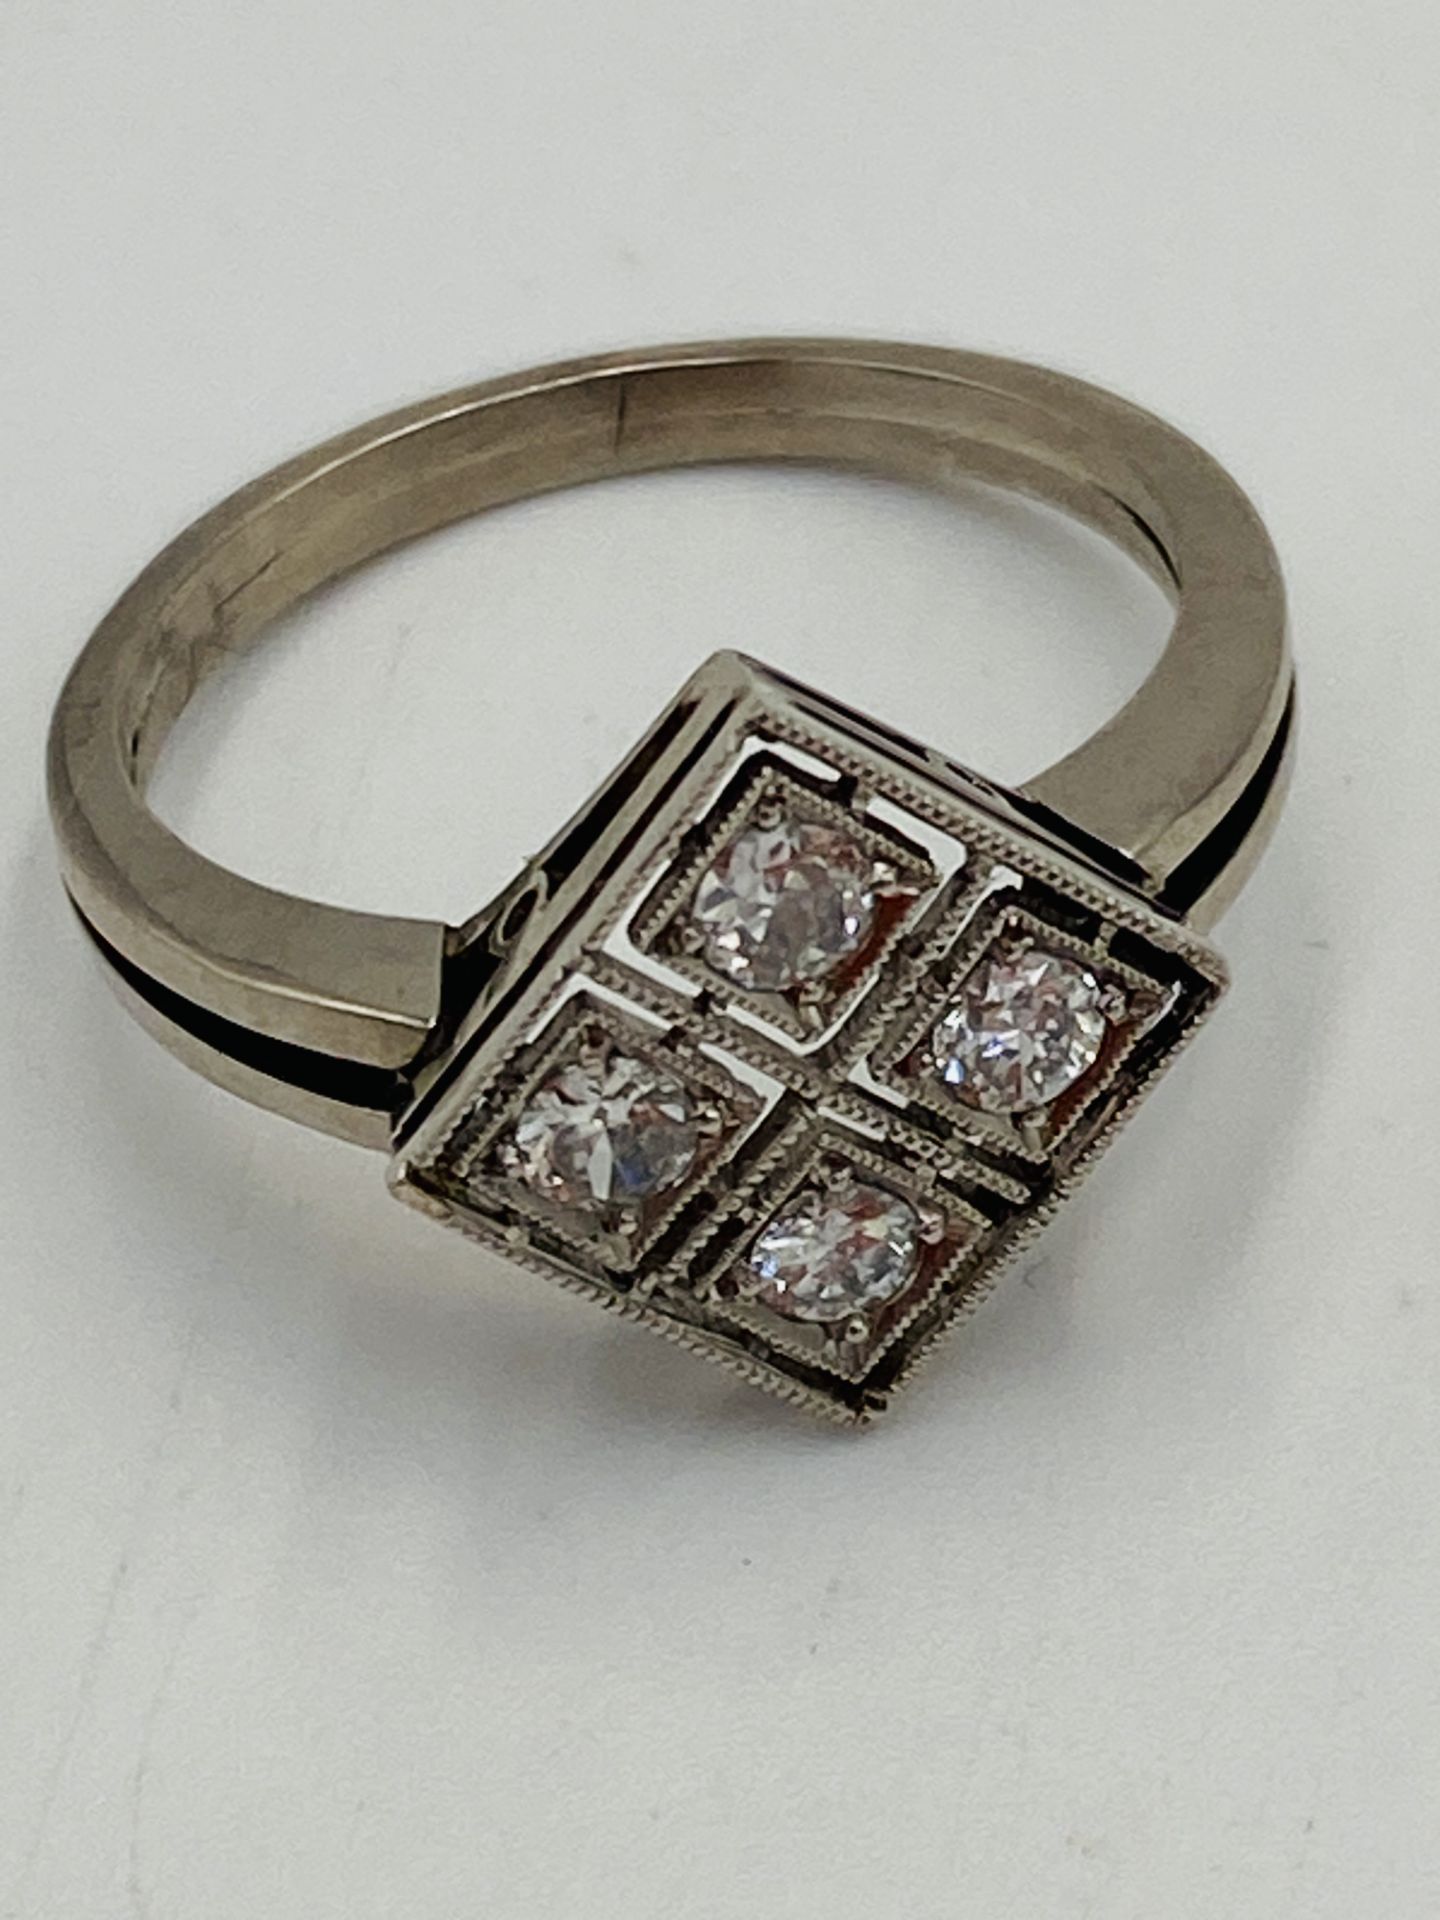 White gold ring set with four diamonds - Image 3 of 6